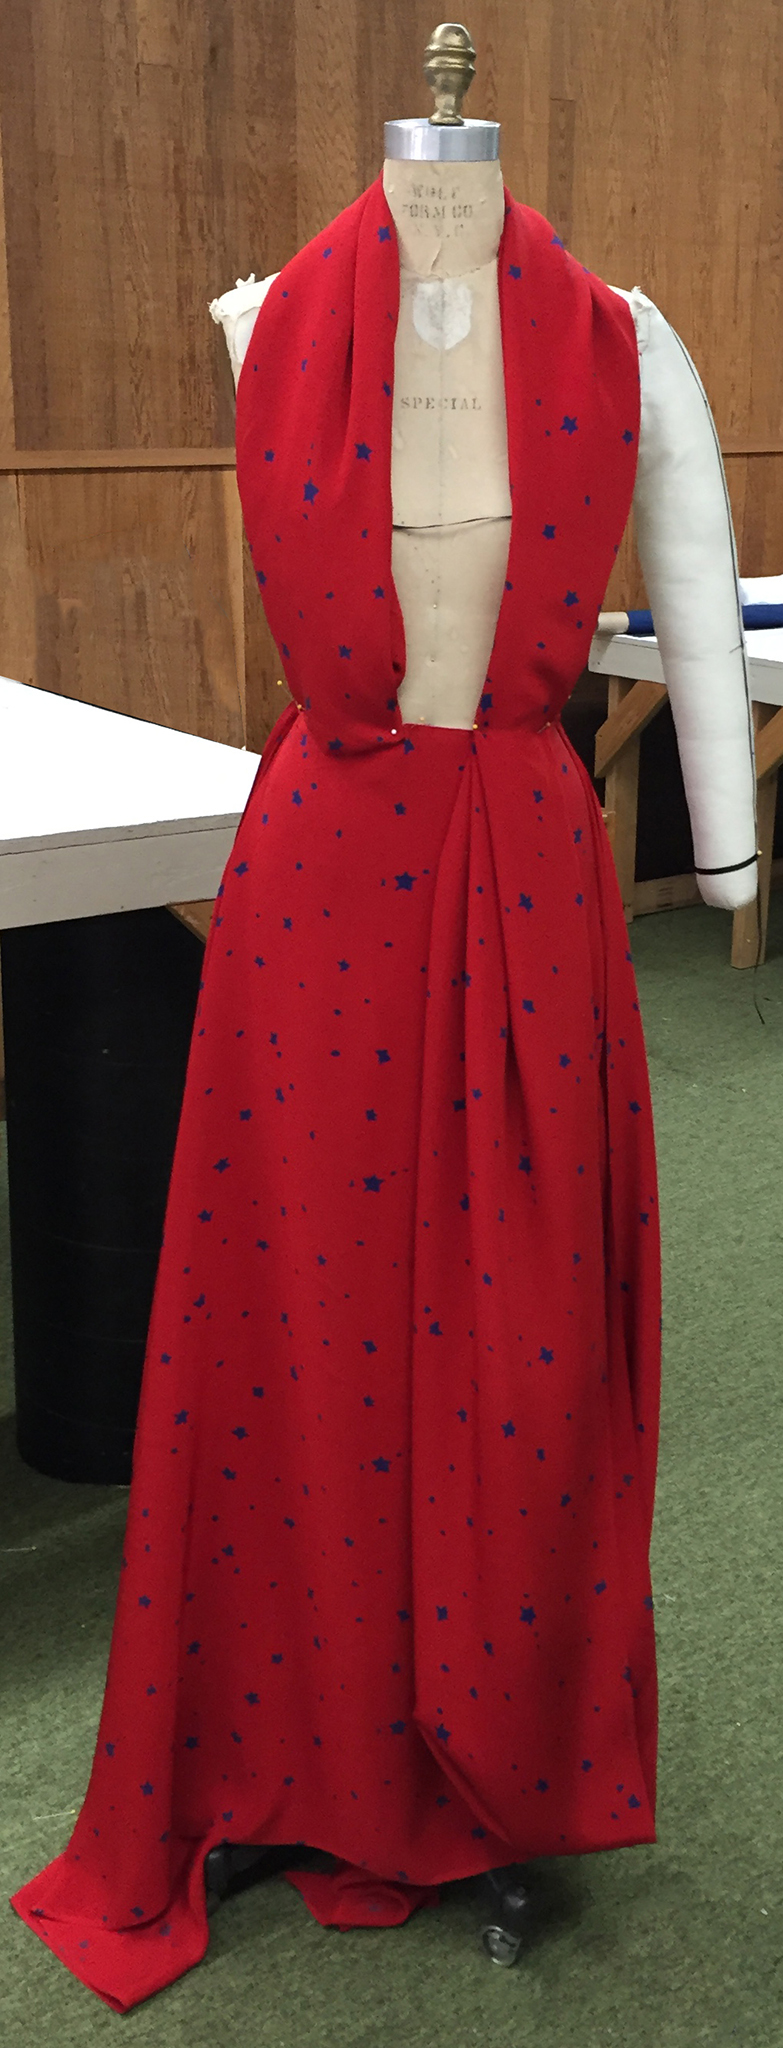 Red silk crepe with blue stars draped over a dress form.